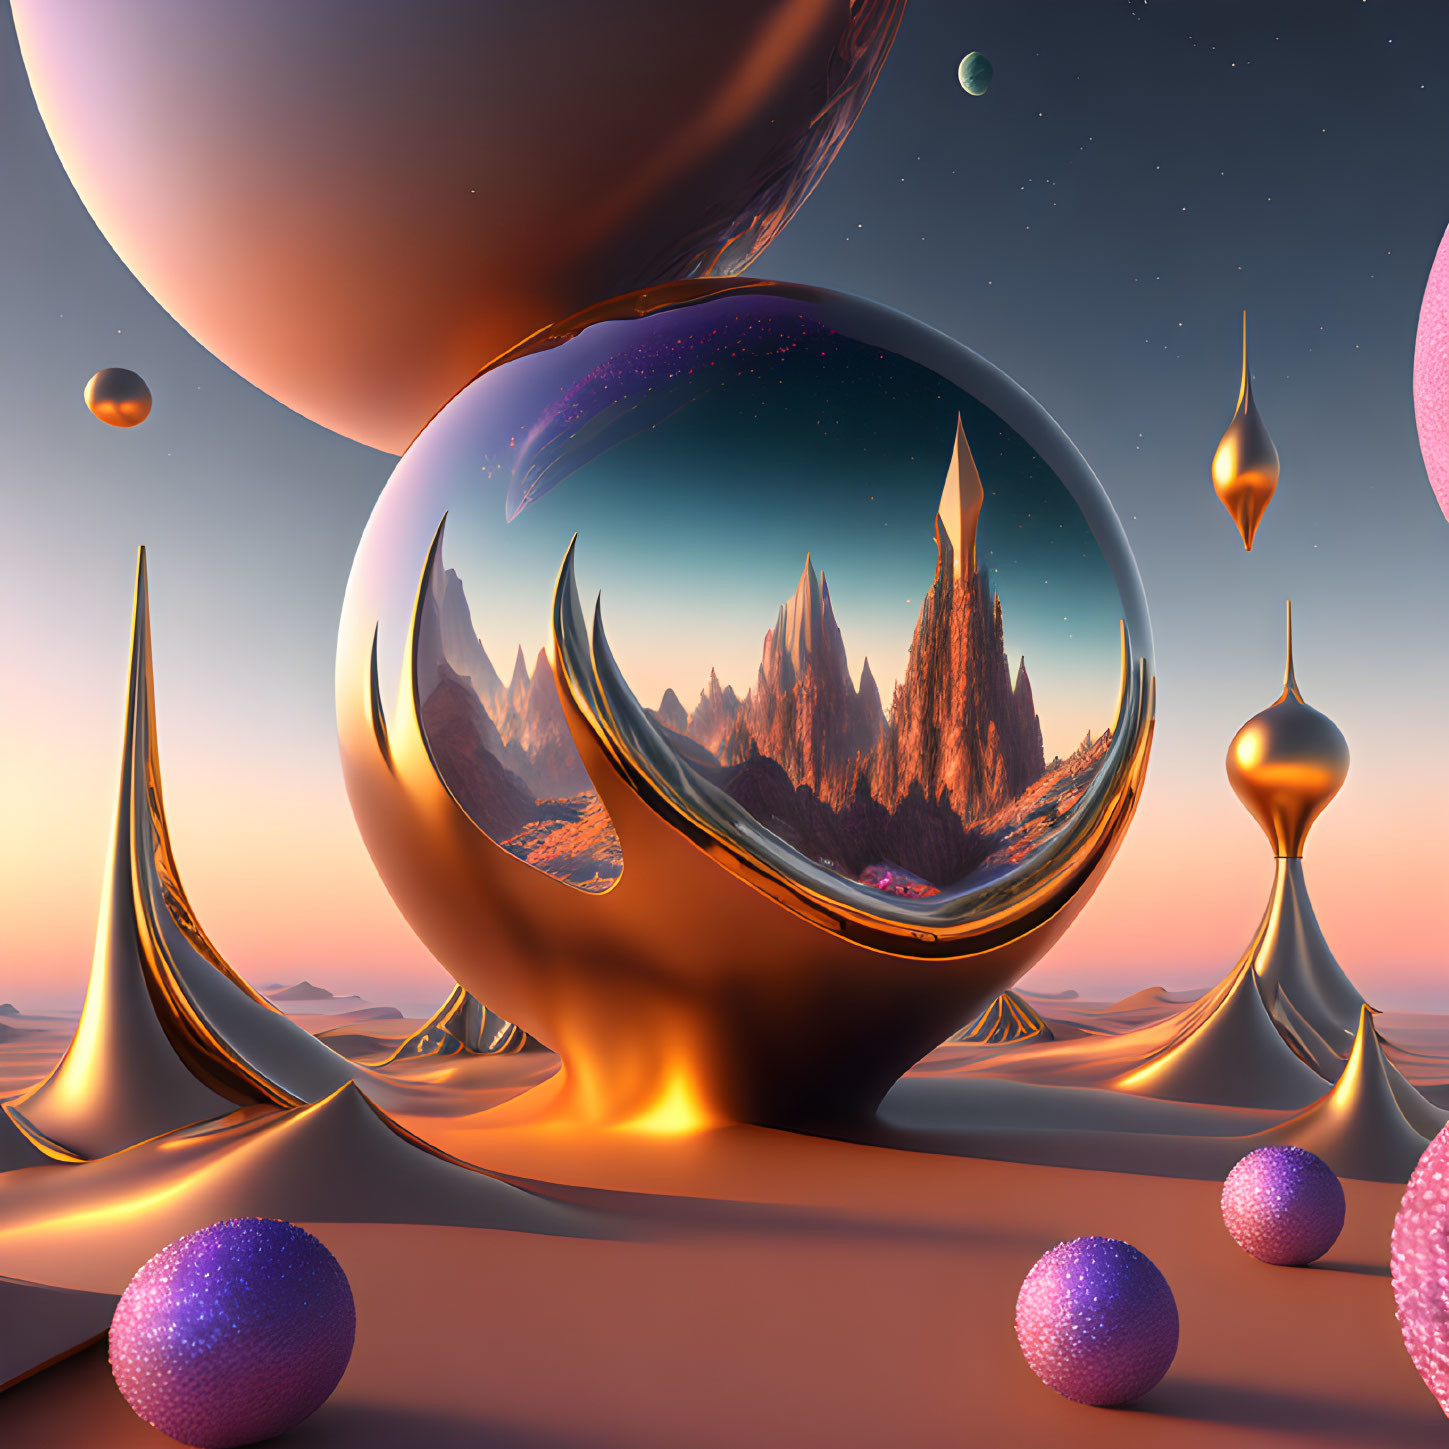 Surreal landscape with reflective spheres, spiky structures, and mountain vista in large orb at